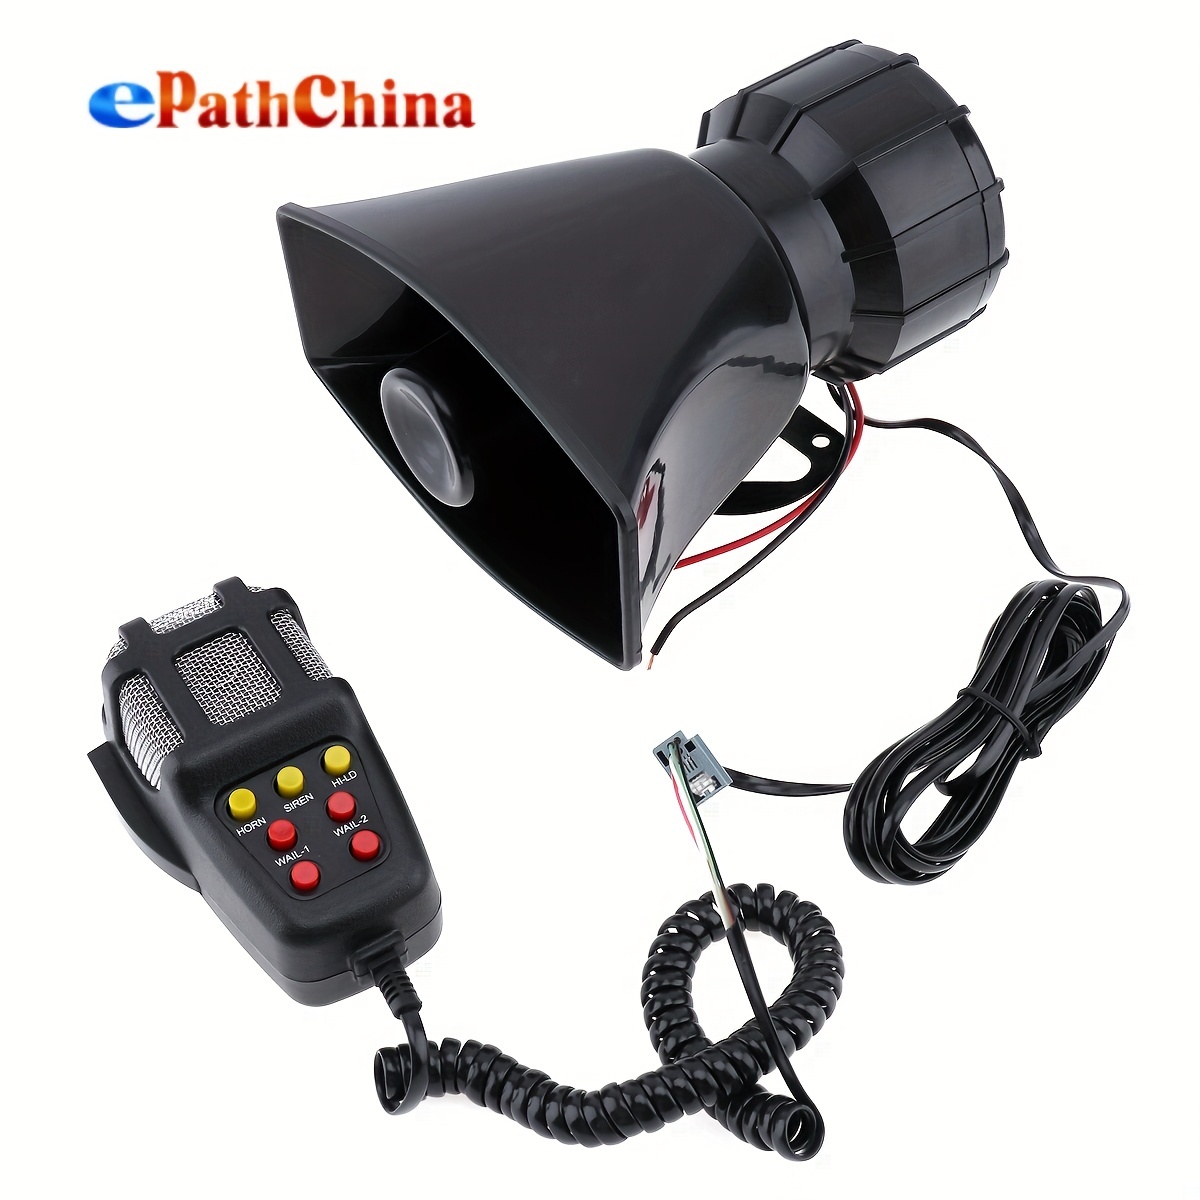 12v Police Siren Pa System With Handheld Microphone & Hands-free